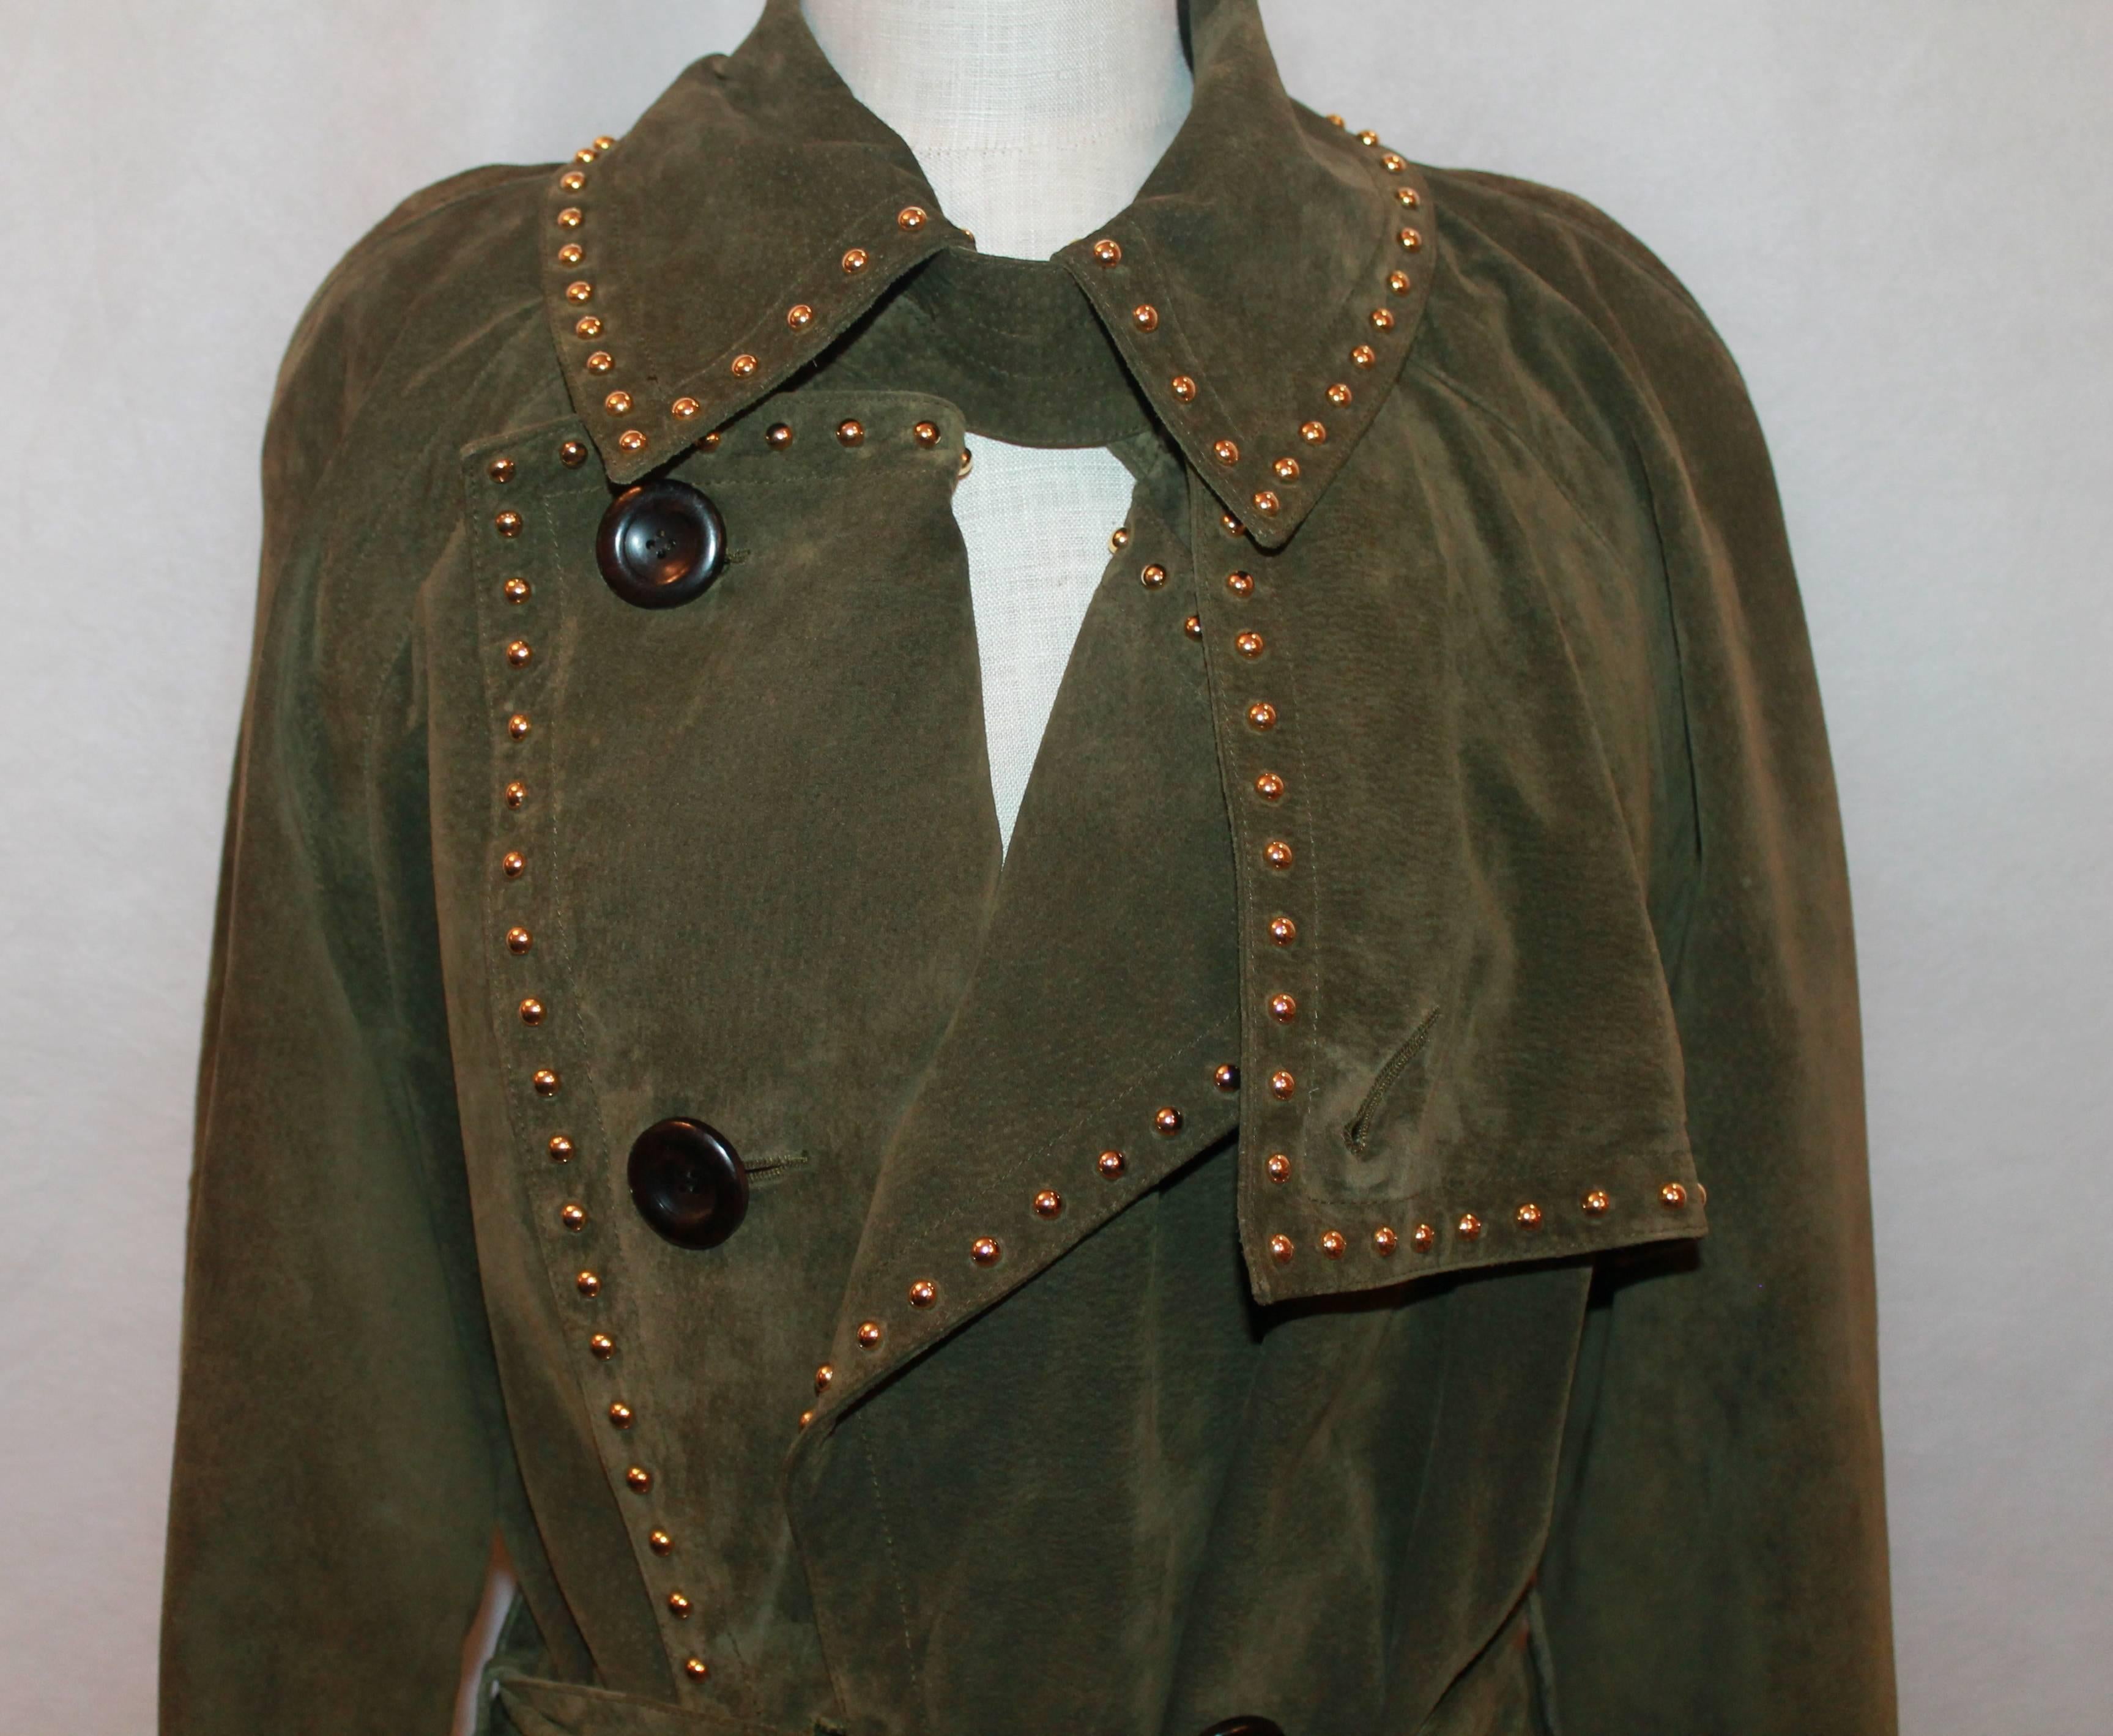 Women's 1990's Yves Saint Laurent Olive Suede Full Length Trench Coat with Belt - 38